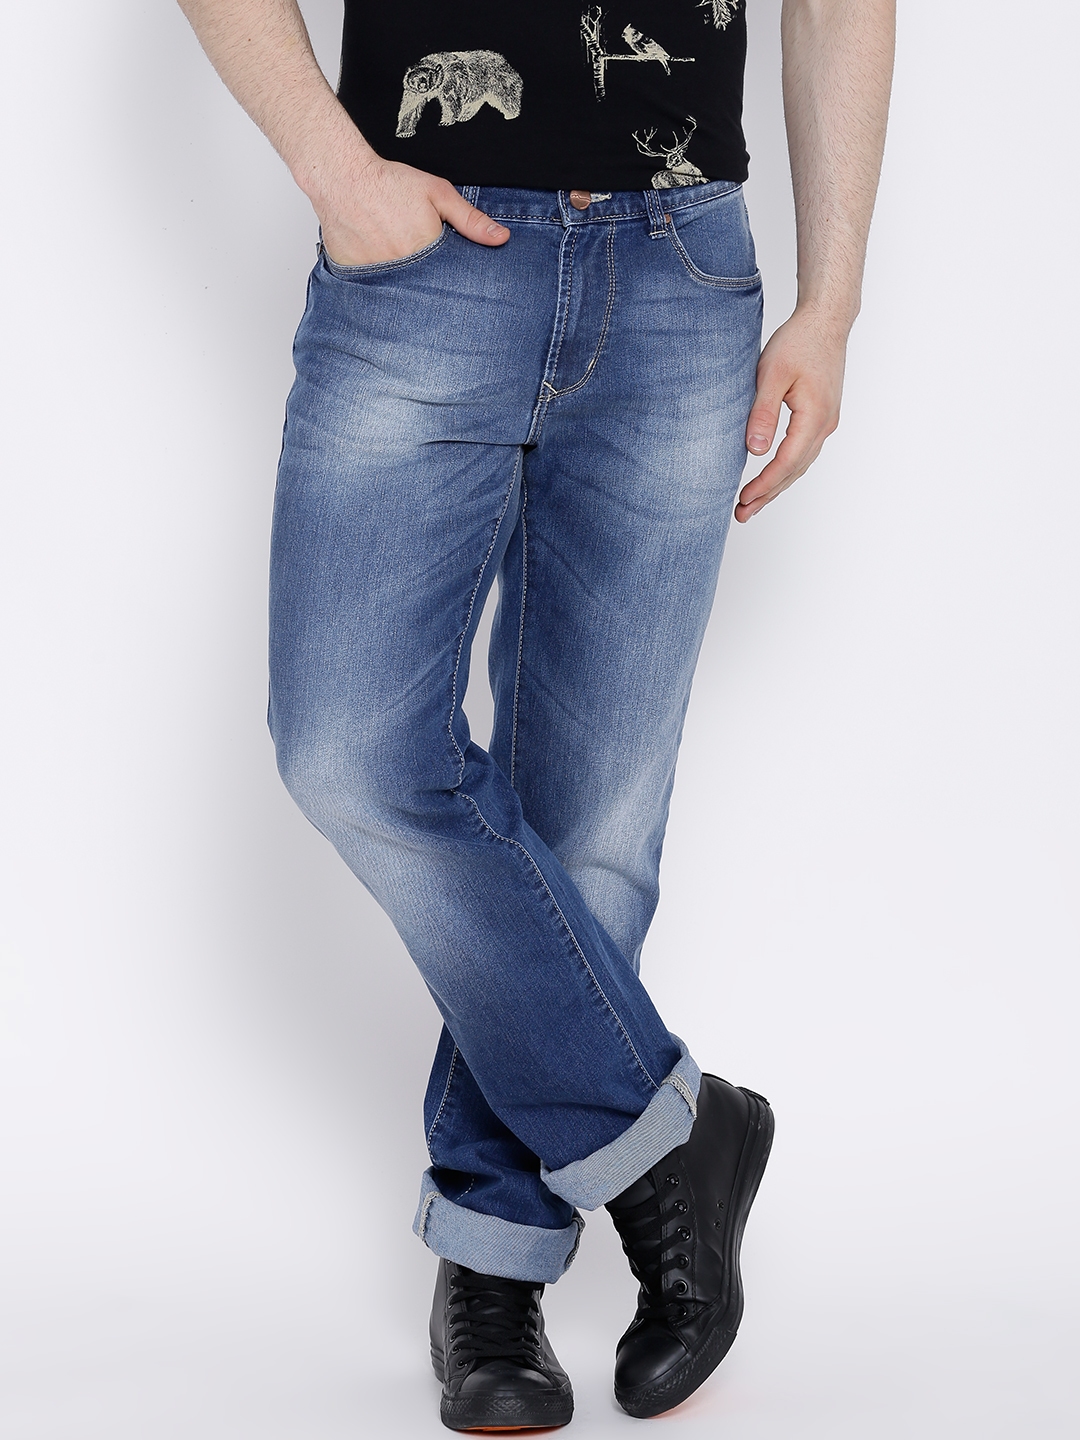 Buy Numero Uno Blue Washed Frazer Fit Jeans - Jeans for Men 1142868 ...